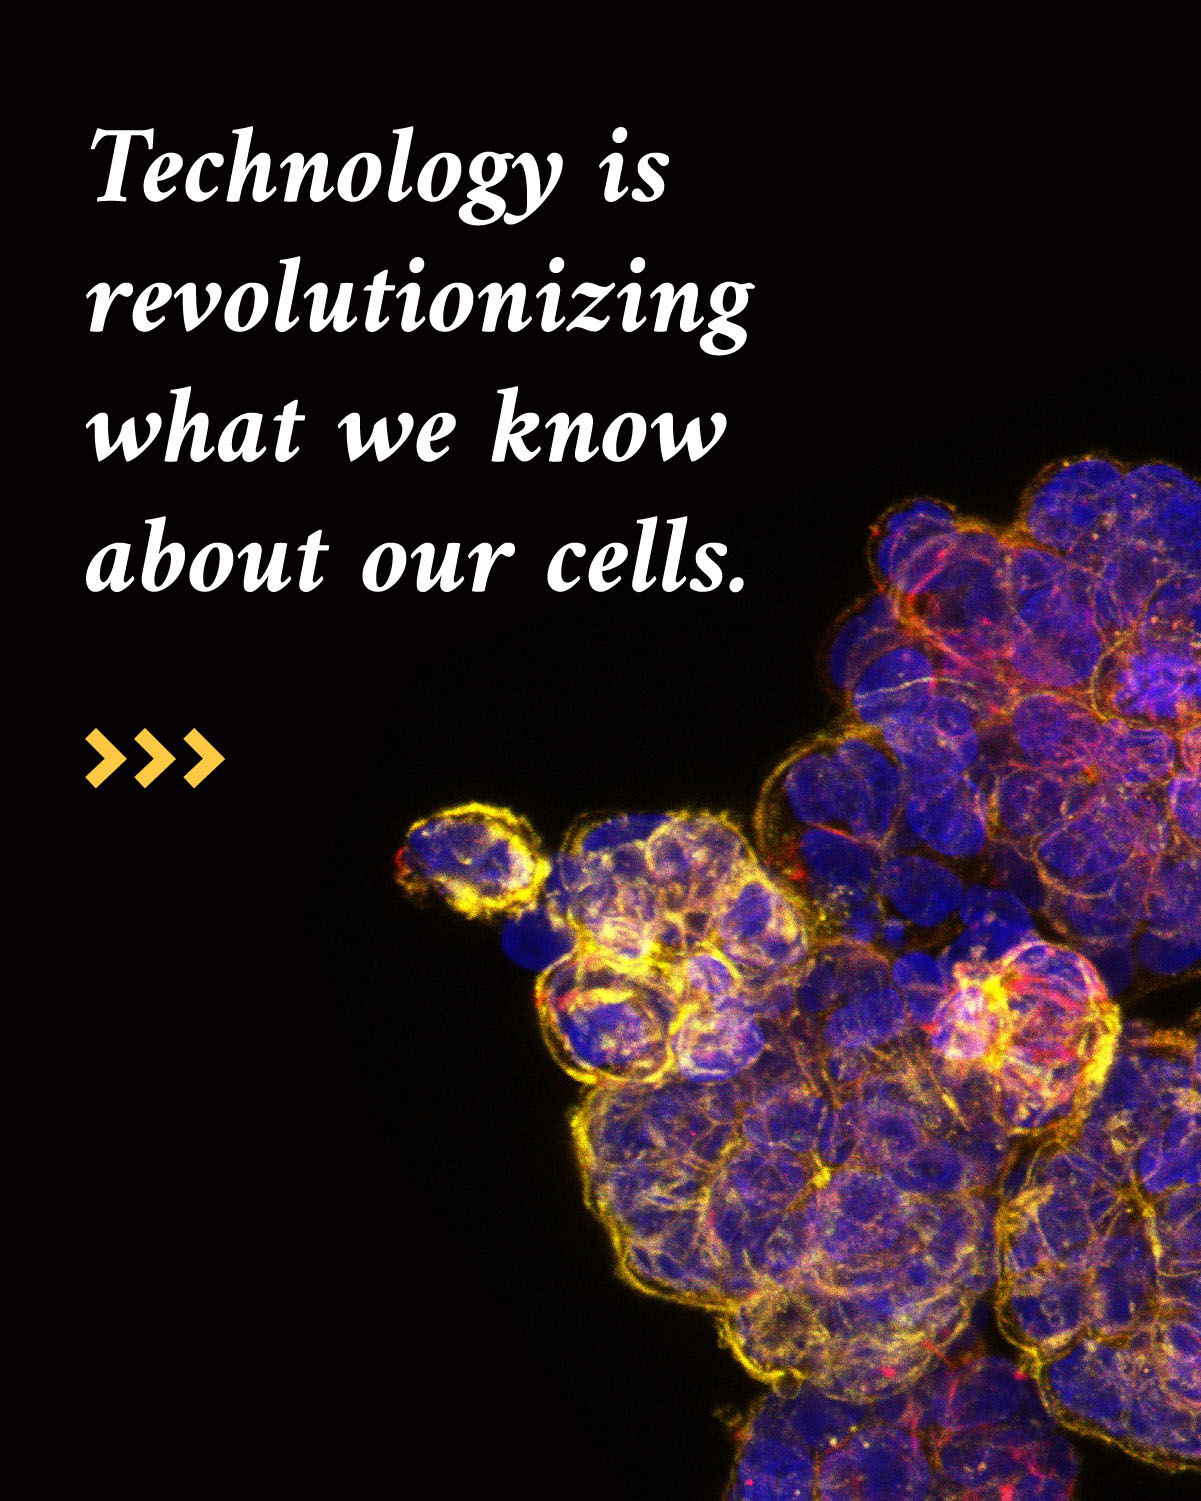 Infographic reads “Technology is revolutionizing what we know about our cells.” Magnified cell imagery in yellow, purple and pink clusters accompany the text along with three arrows pointing to the right in yellow.